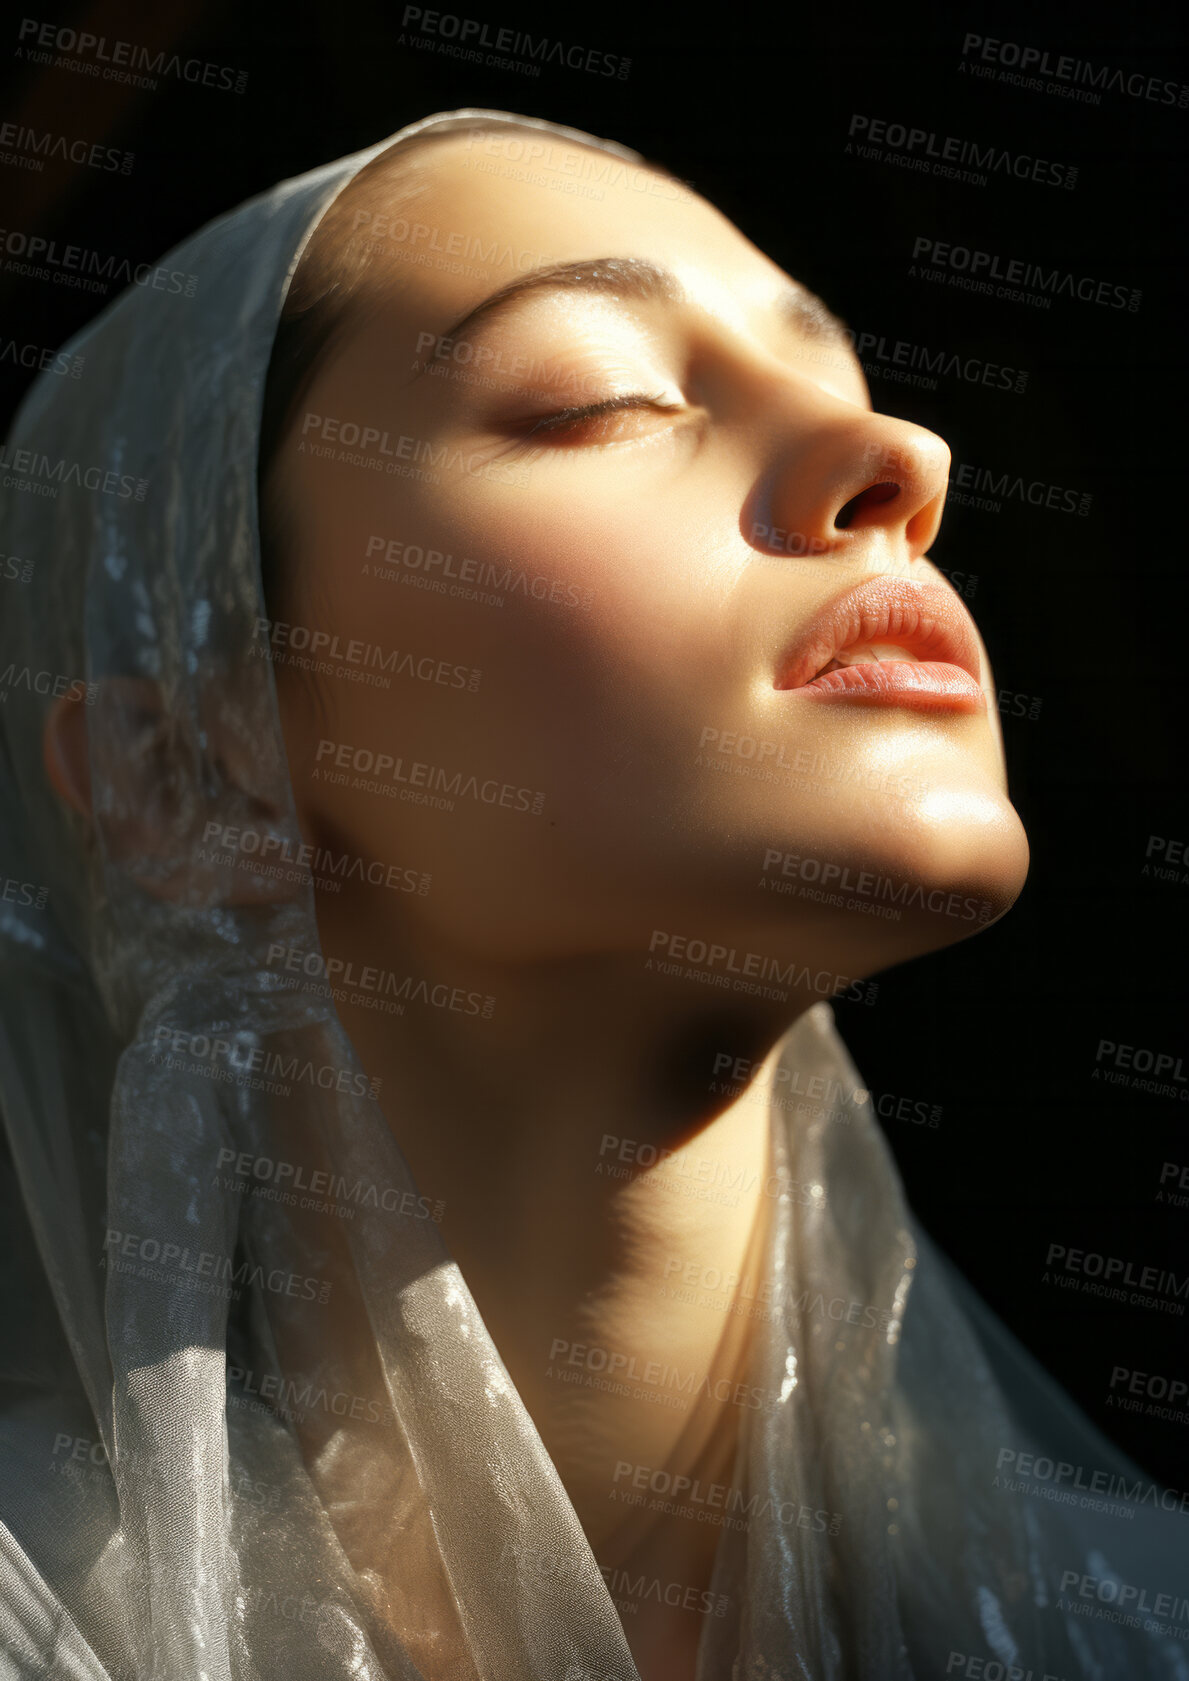 Buy stock photo Young muslim woman lifting her head in prayer. Sunlight on her face. Religion concept.